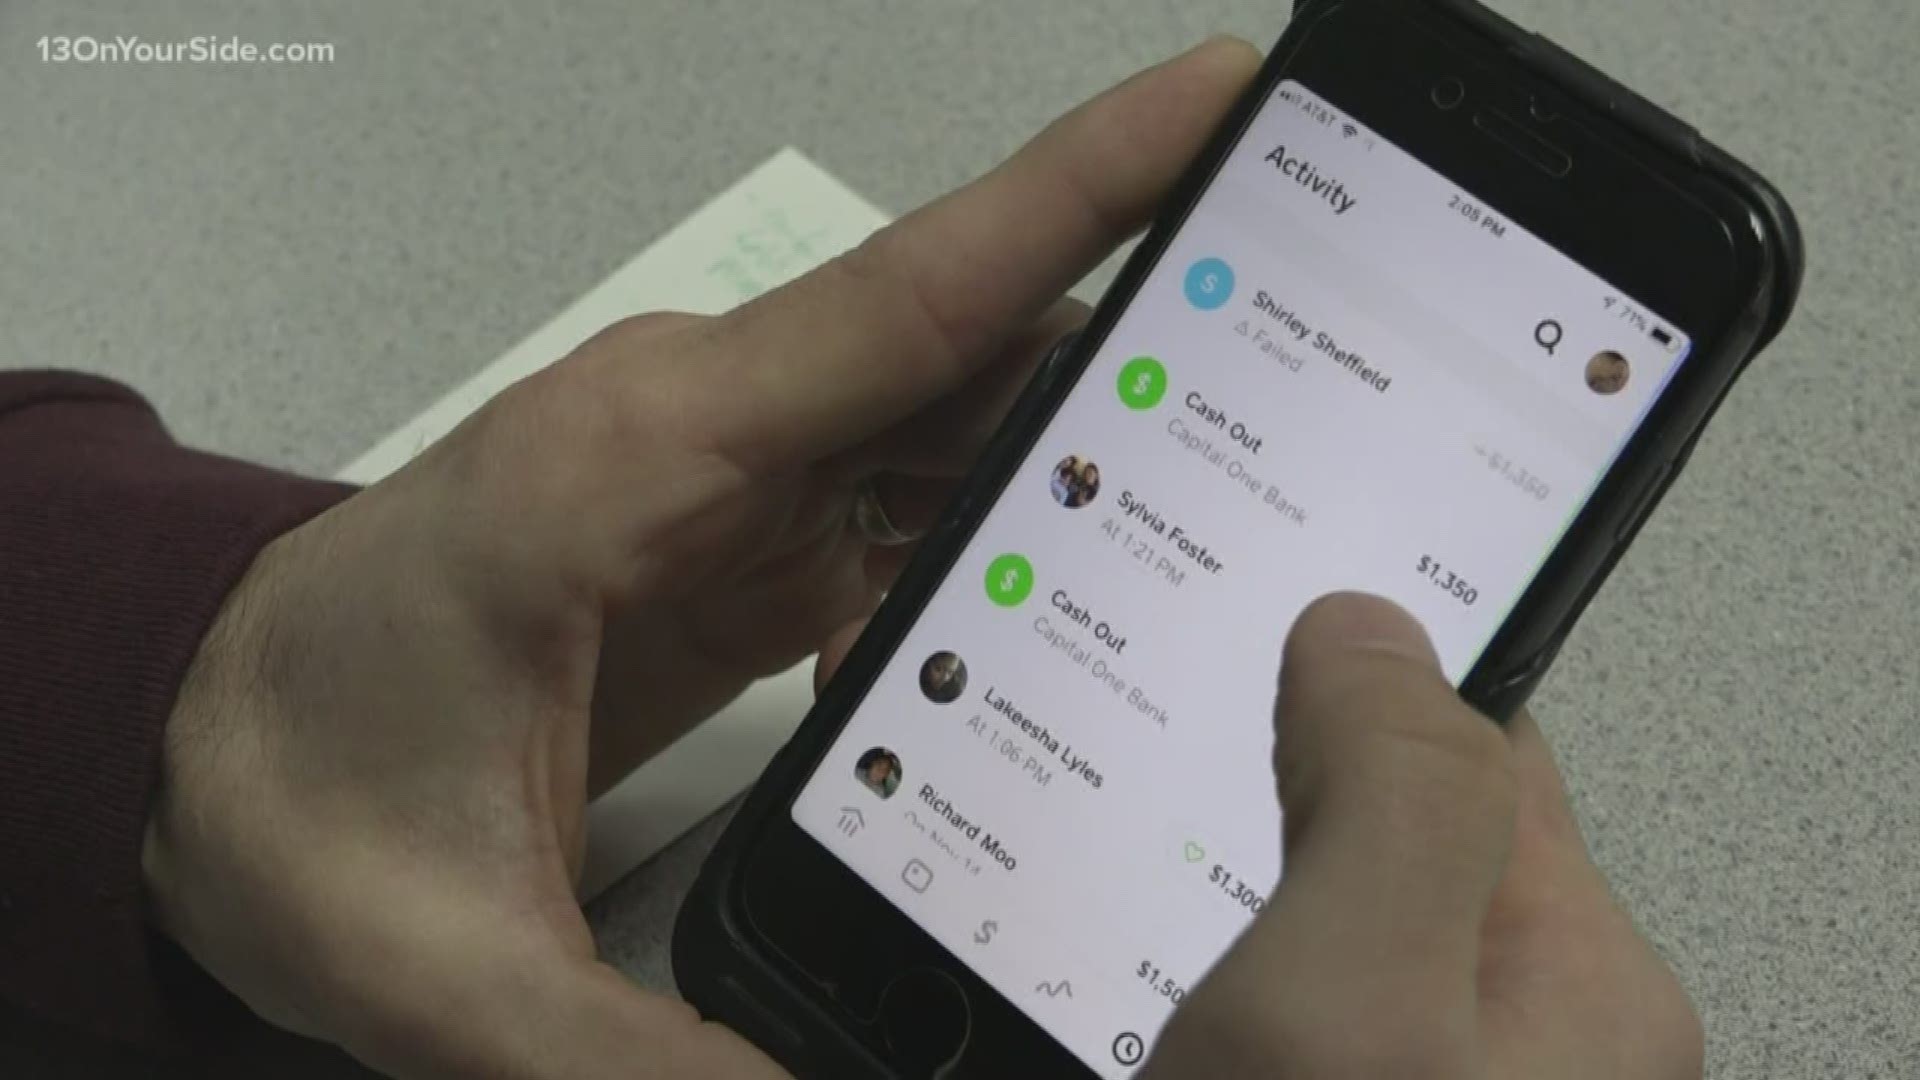 Cash App is an easy way to pay friends or family instead of carrying cash, but James Sackett says he'll never use it again after $10K was stolen from him.